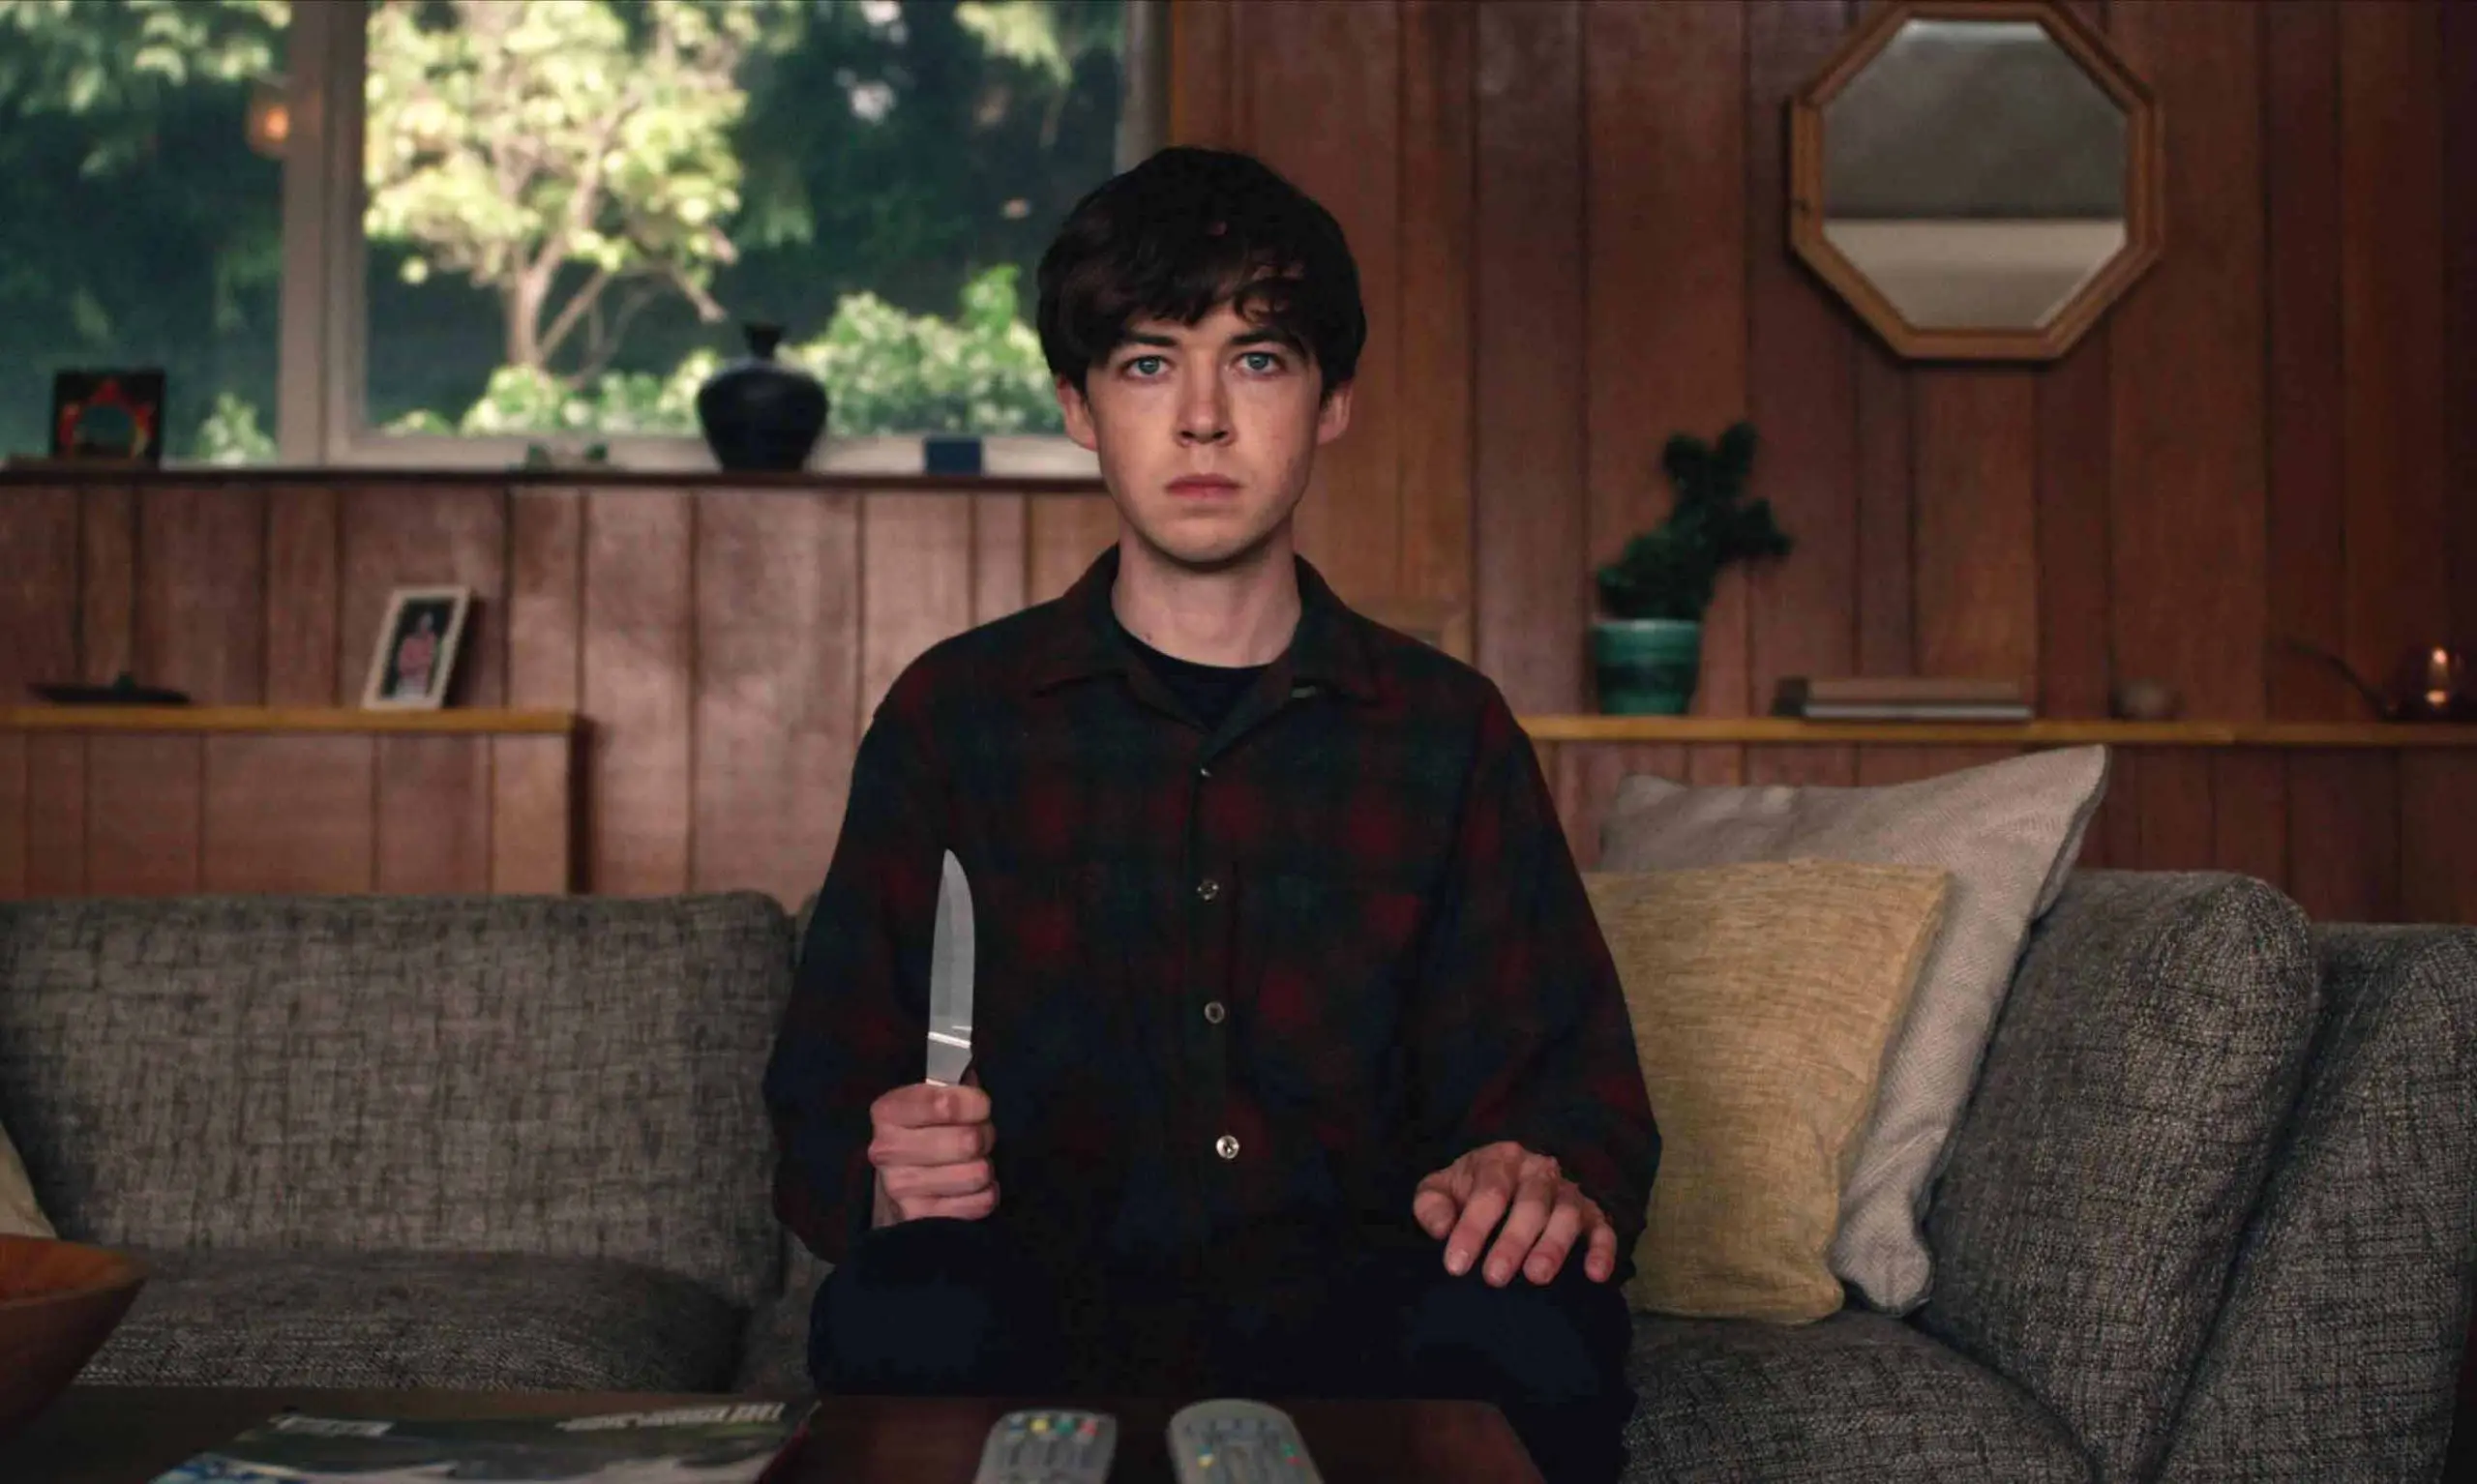 Alex Lawther de The End Of The F***ing World rejoint le casting du prochain Wes Anderson